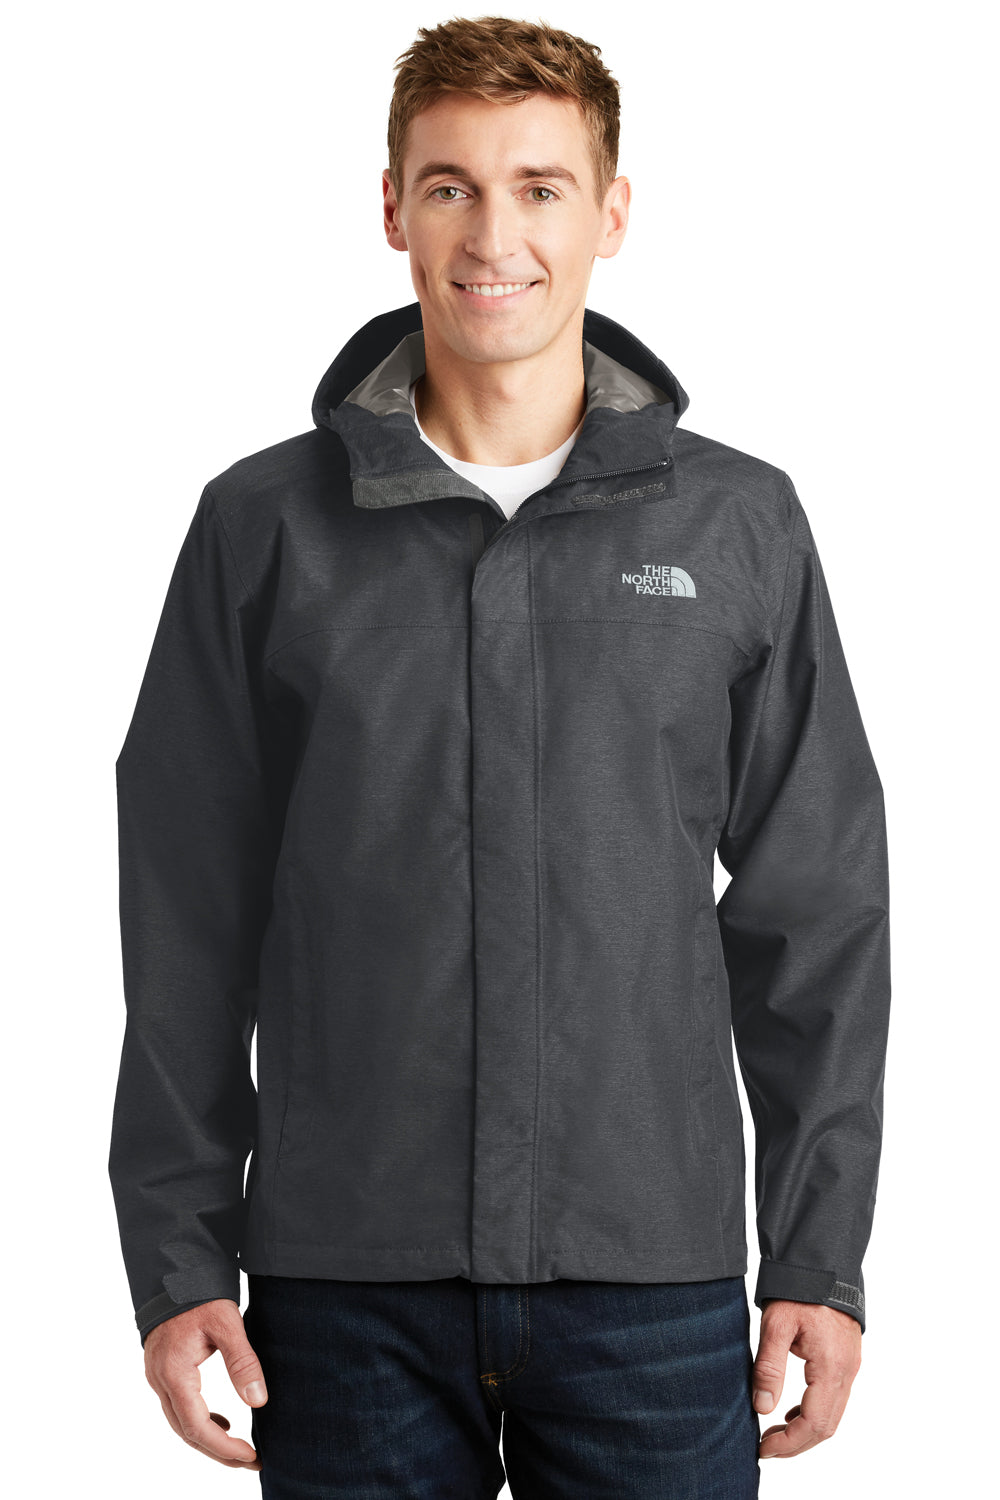 The North Face NF0A3LH4 Mens DryVent Waterproof Full Zip Hooded Jacket Heather Dark Grey Front